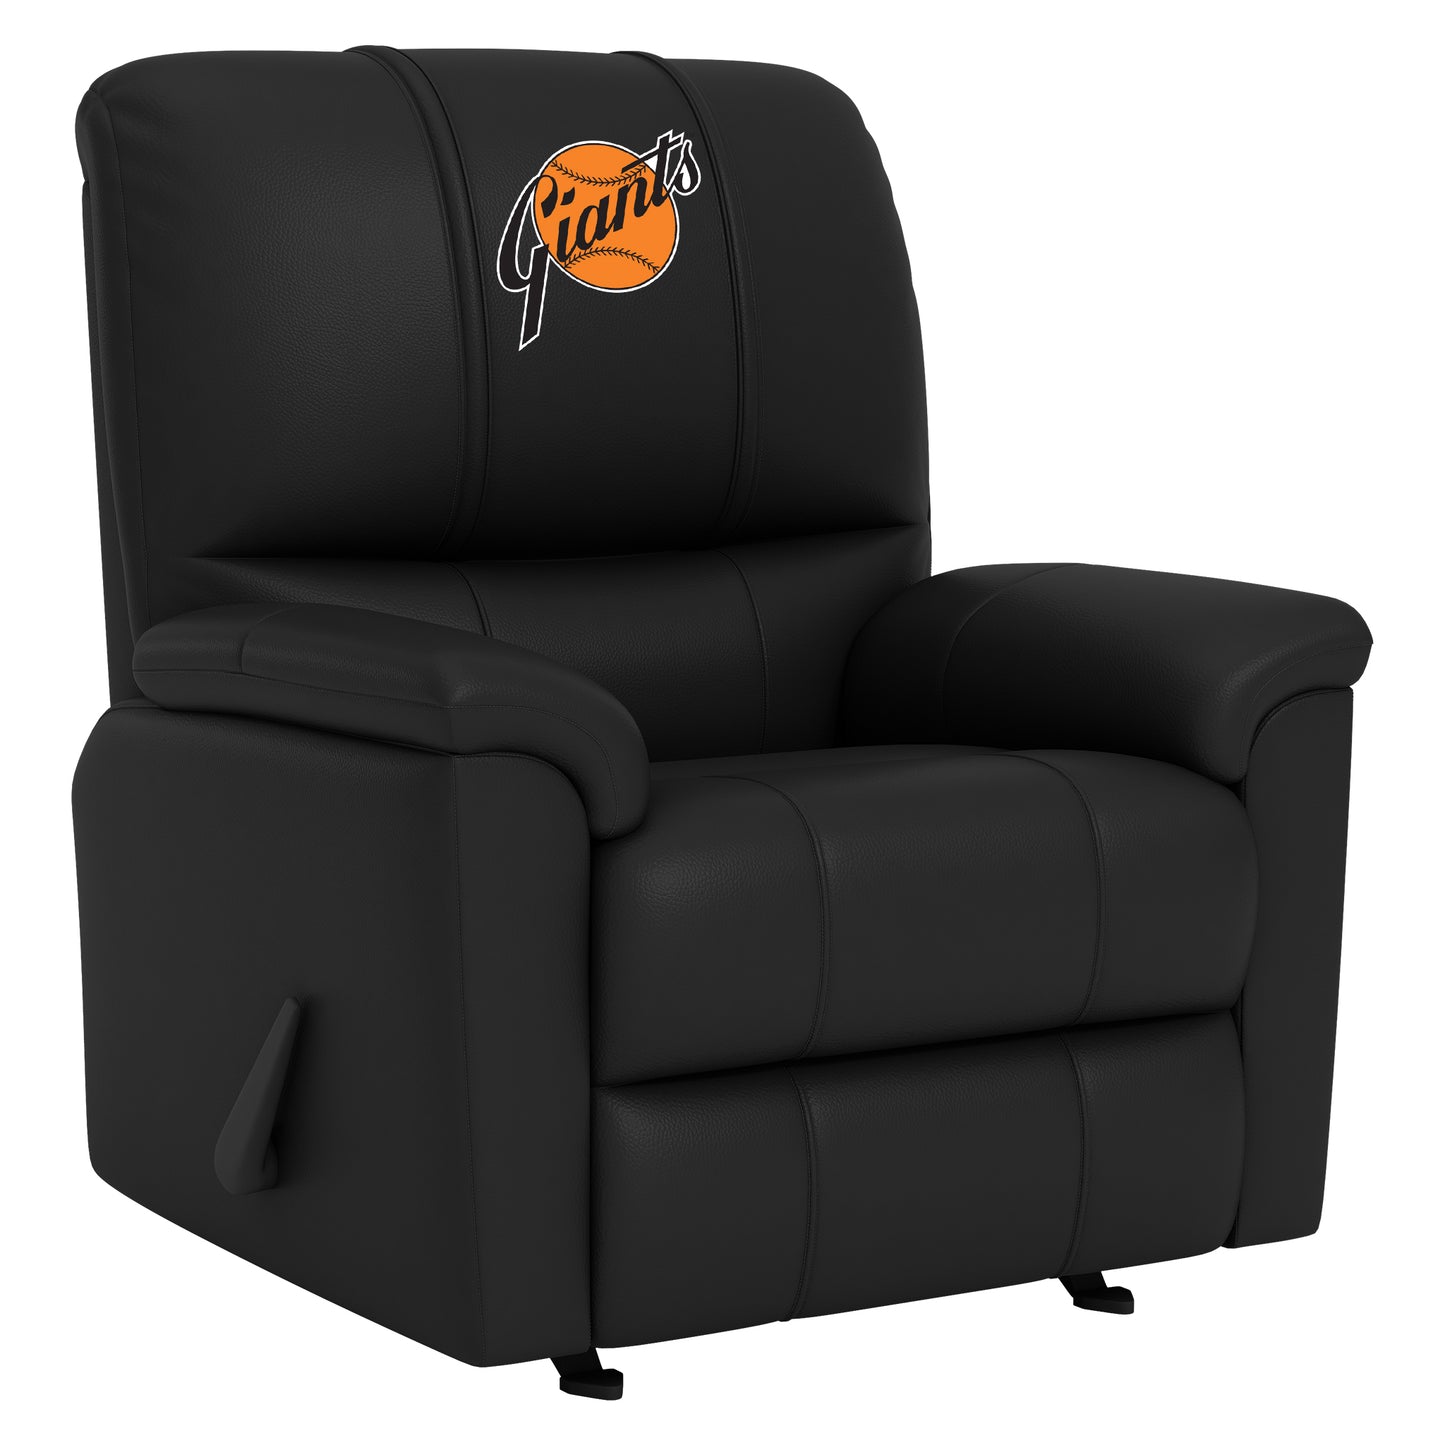 Freedom Rocker Recliner with San Francisco Giants Cooperstown